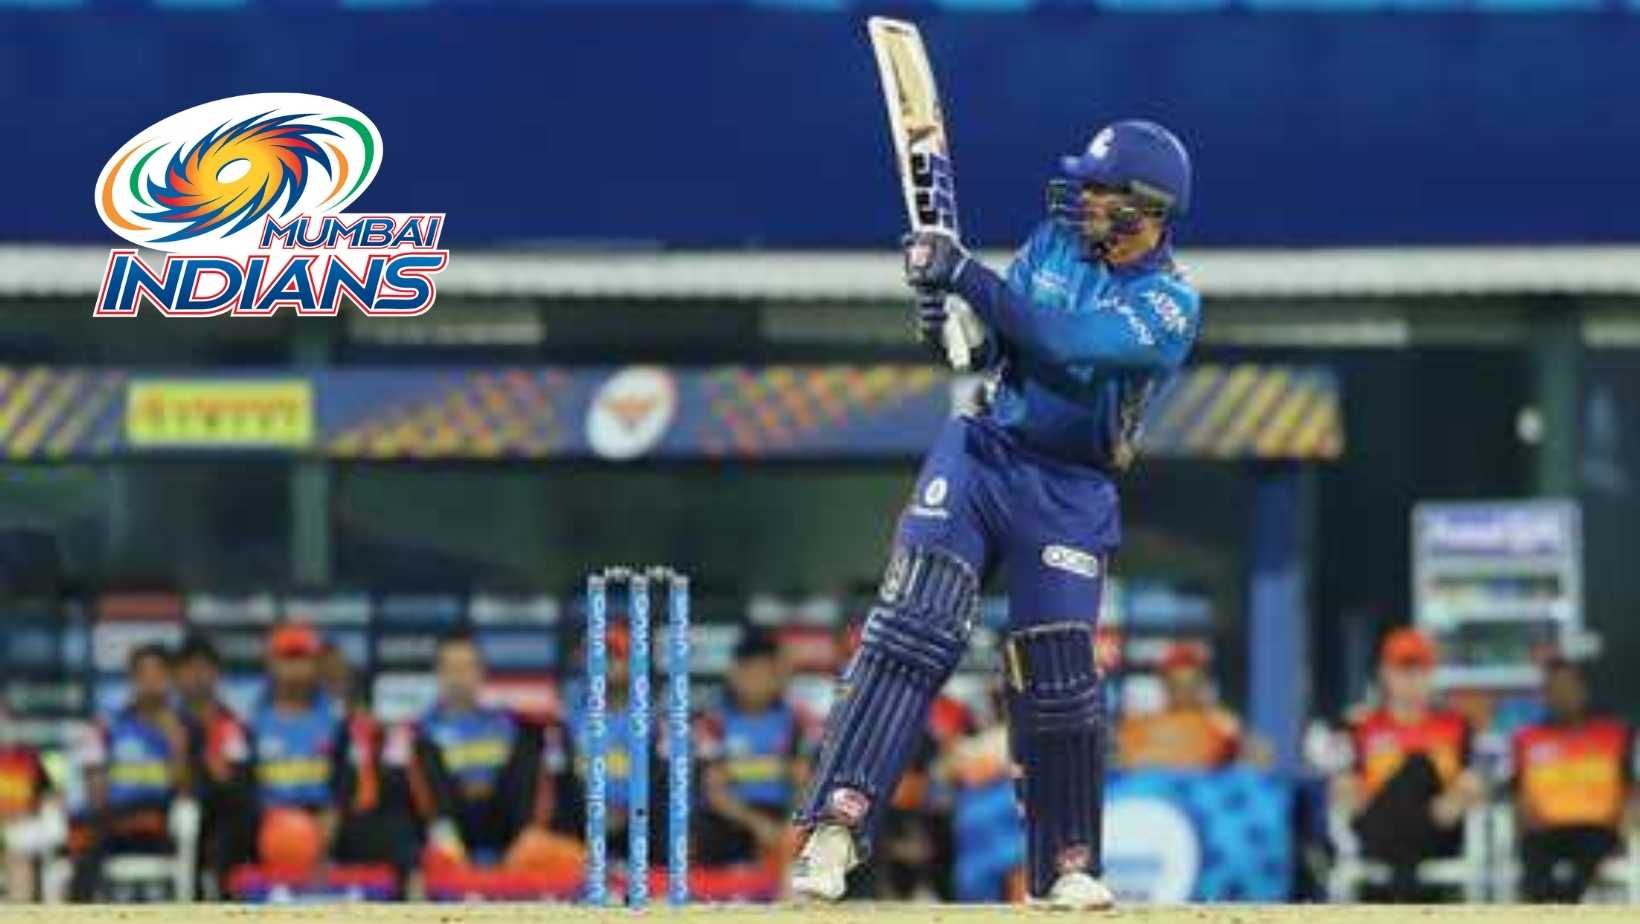 Mumbai Indians in the Indian Premier League